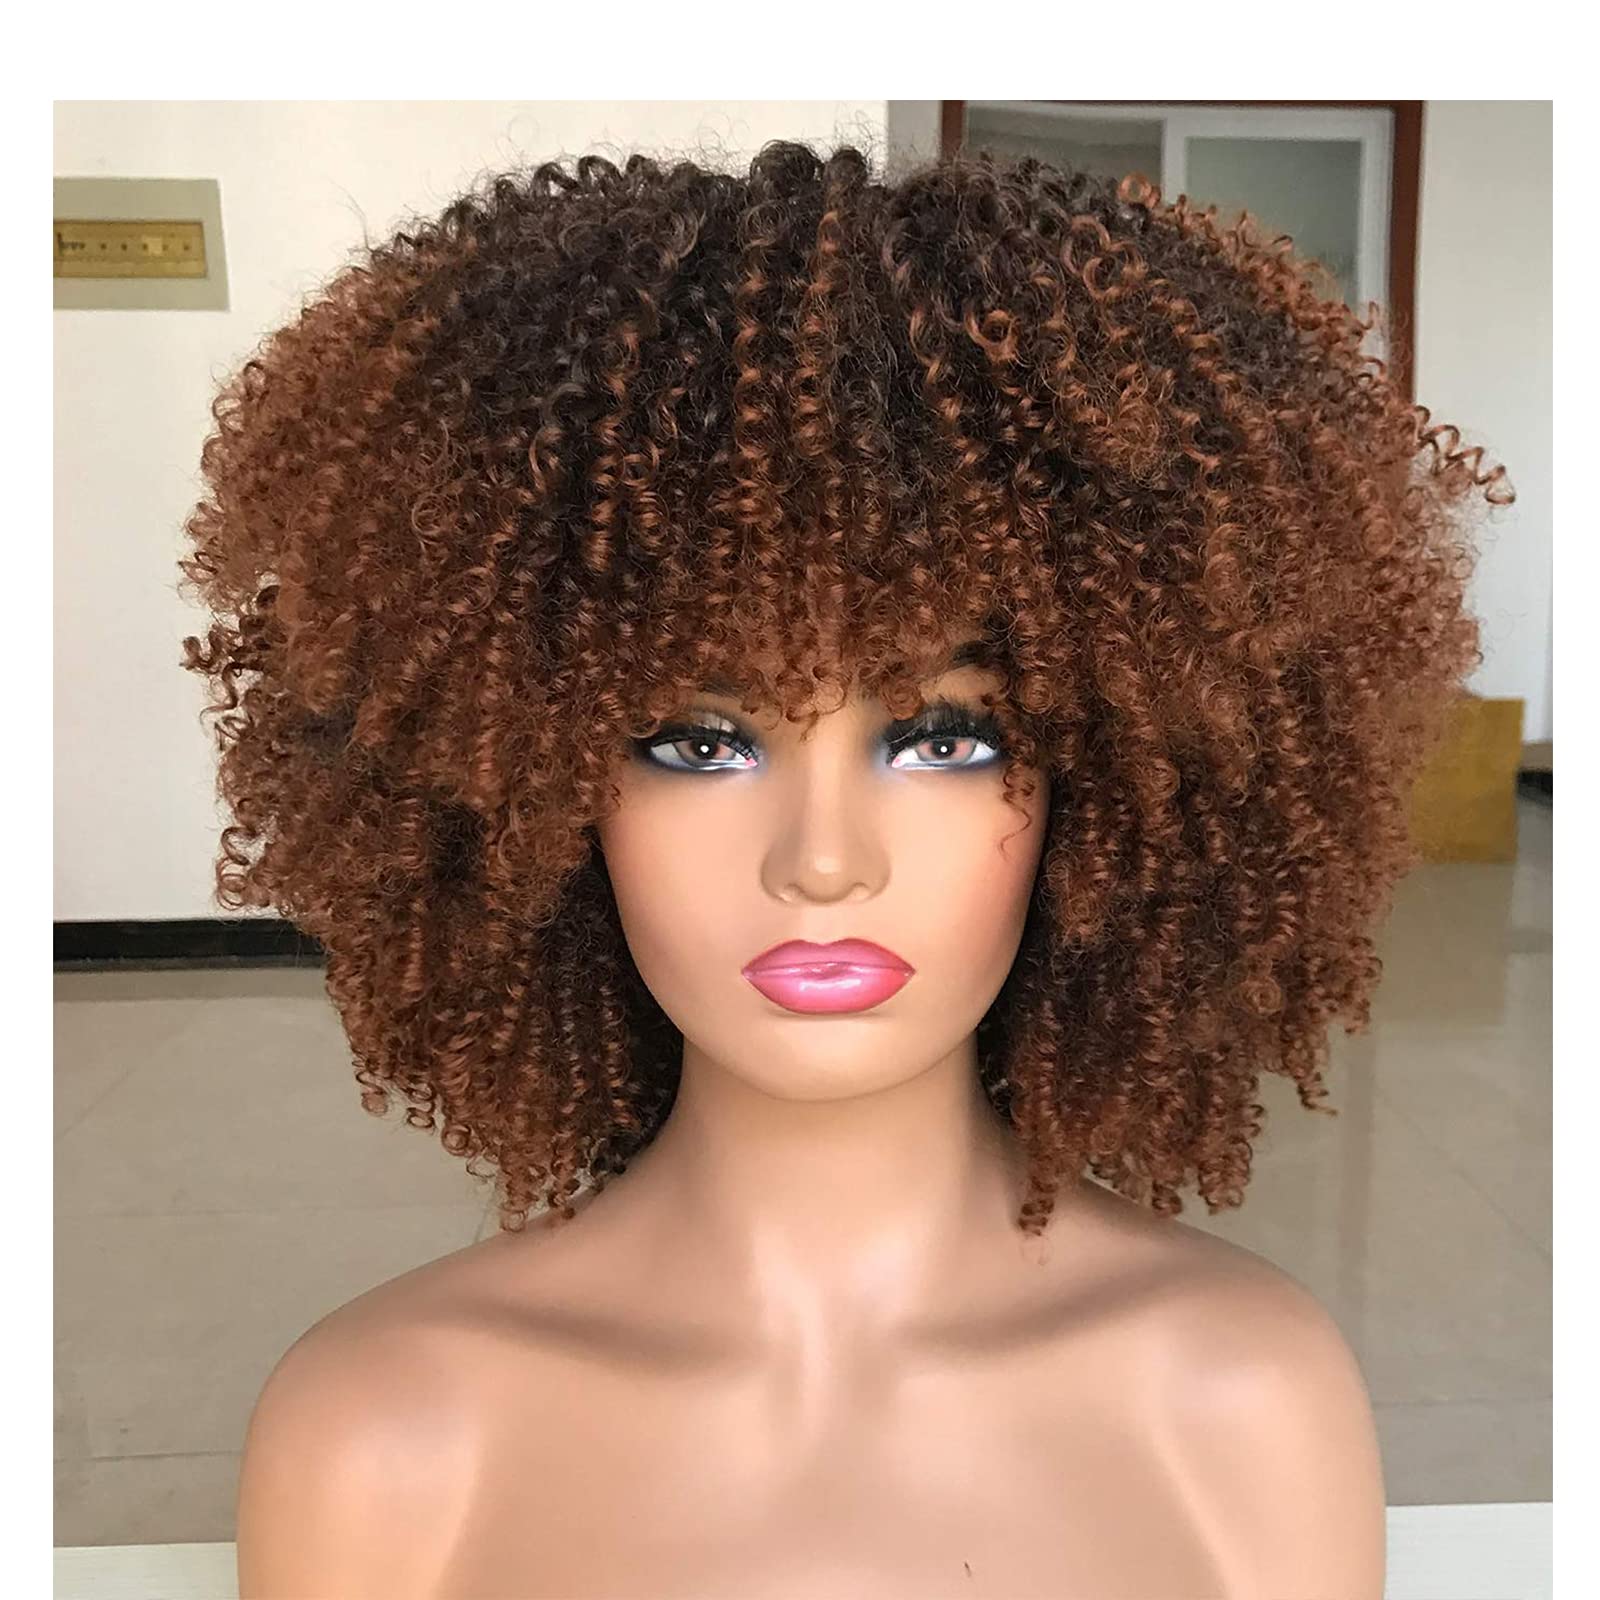 ANNISOUL Afro Bomb Curly Wigs for Black Women Short Afro Kinky Curly Wig  with Bangs 14inch